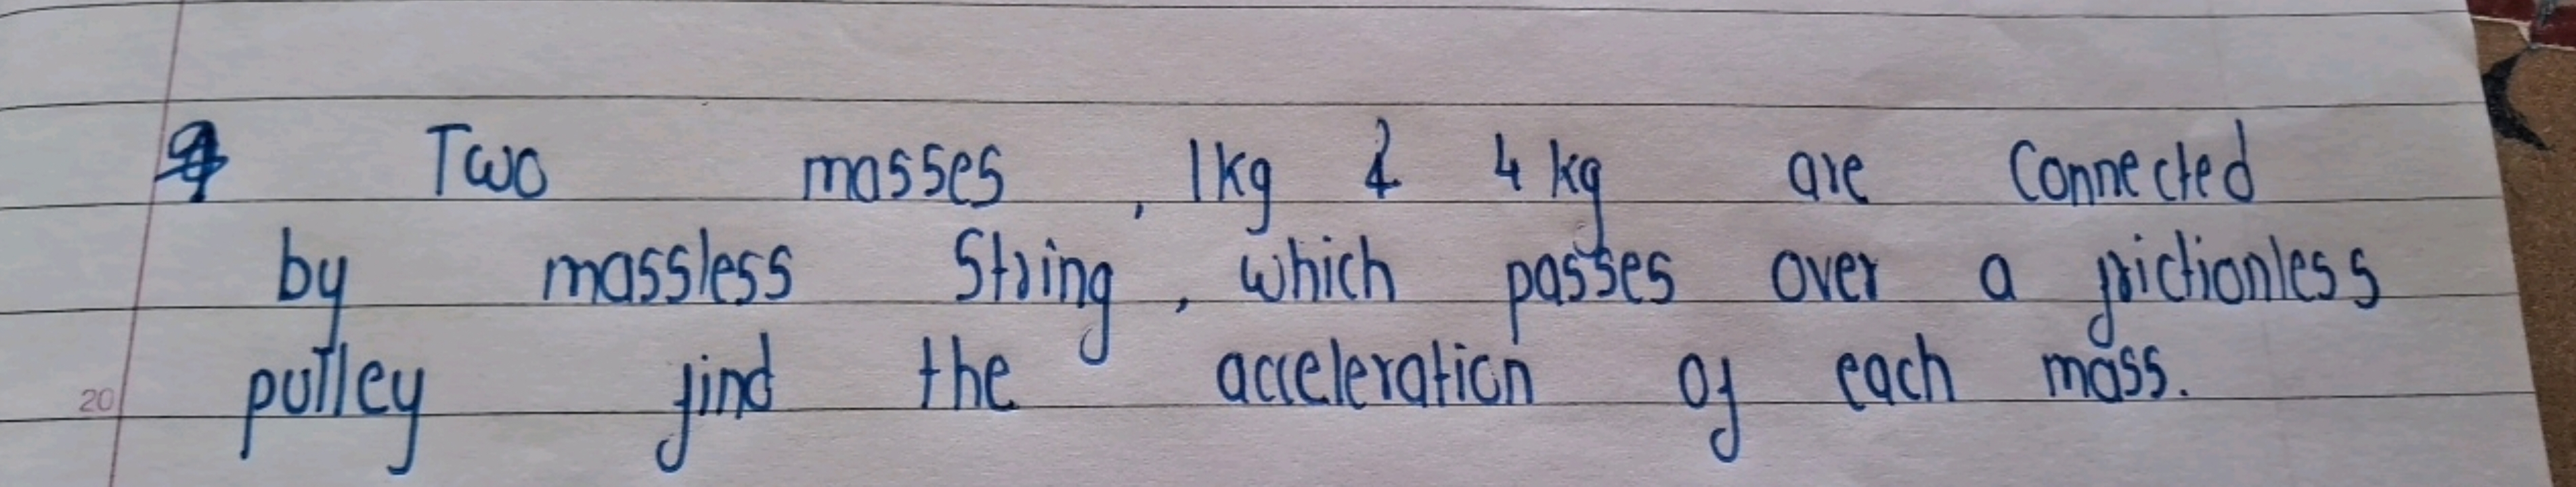 Two masses, 1 kg&4 kg are connected by massless String, which passes o